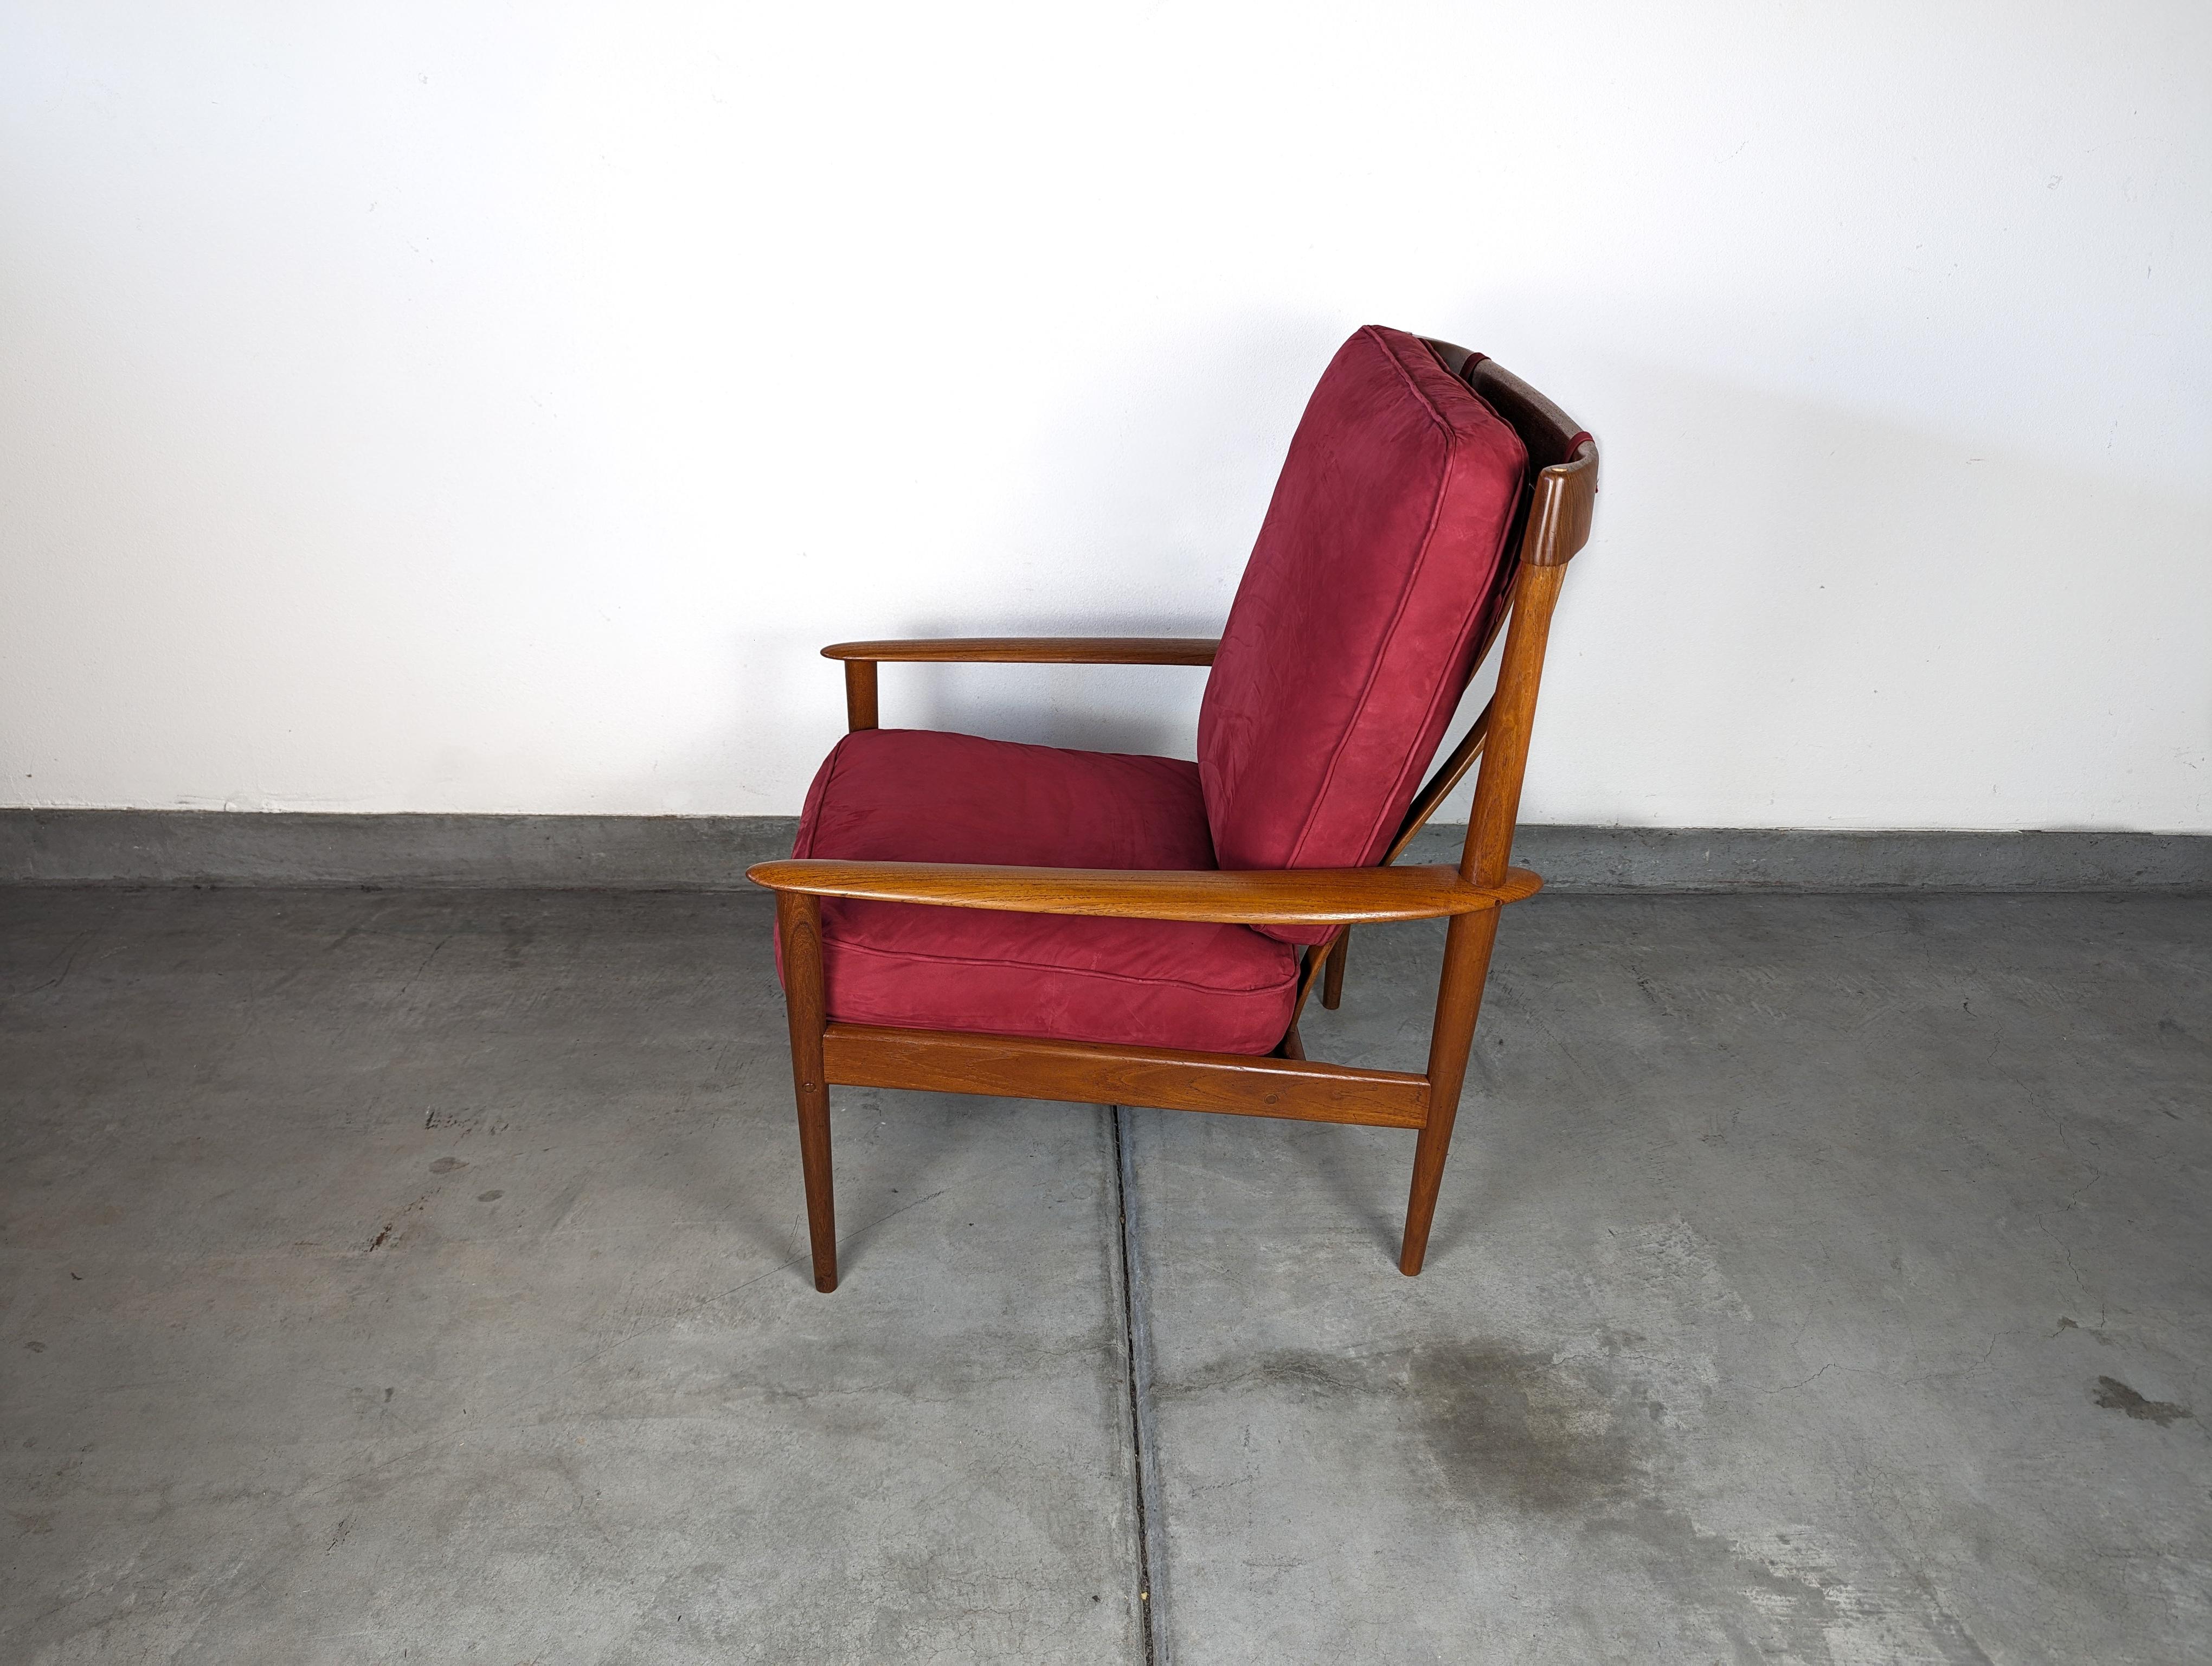 Mid-20th Century Mid-Century Modern Lounge Chair by Grete Jalk, PJ56 Highback Model, c1960s For Sale